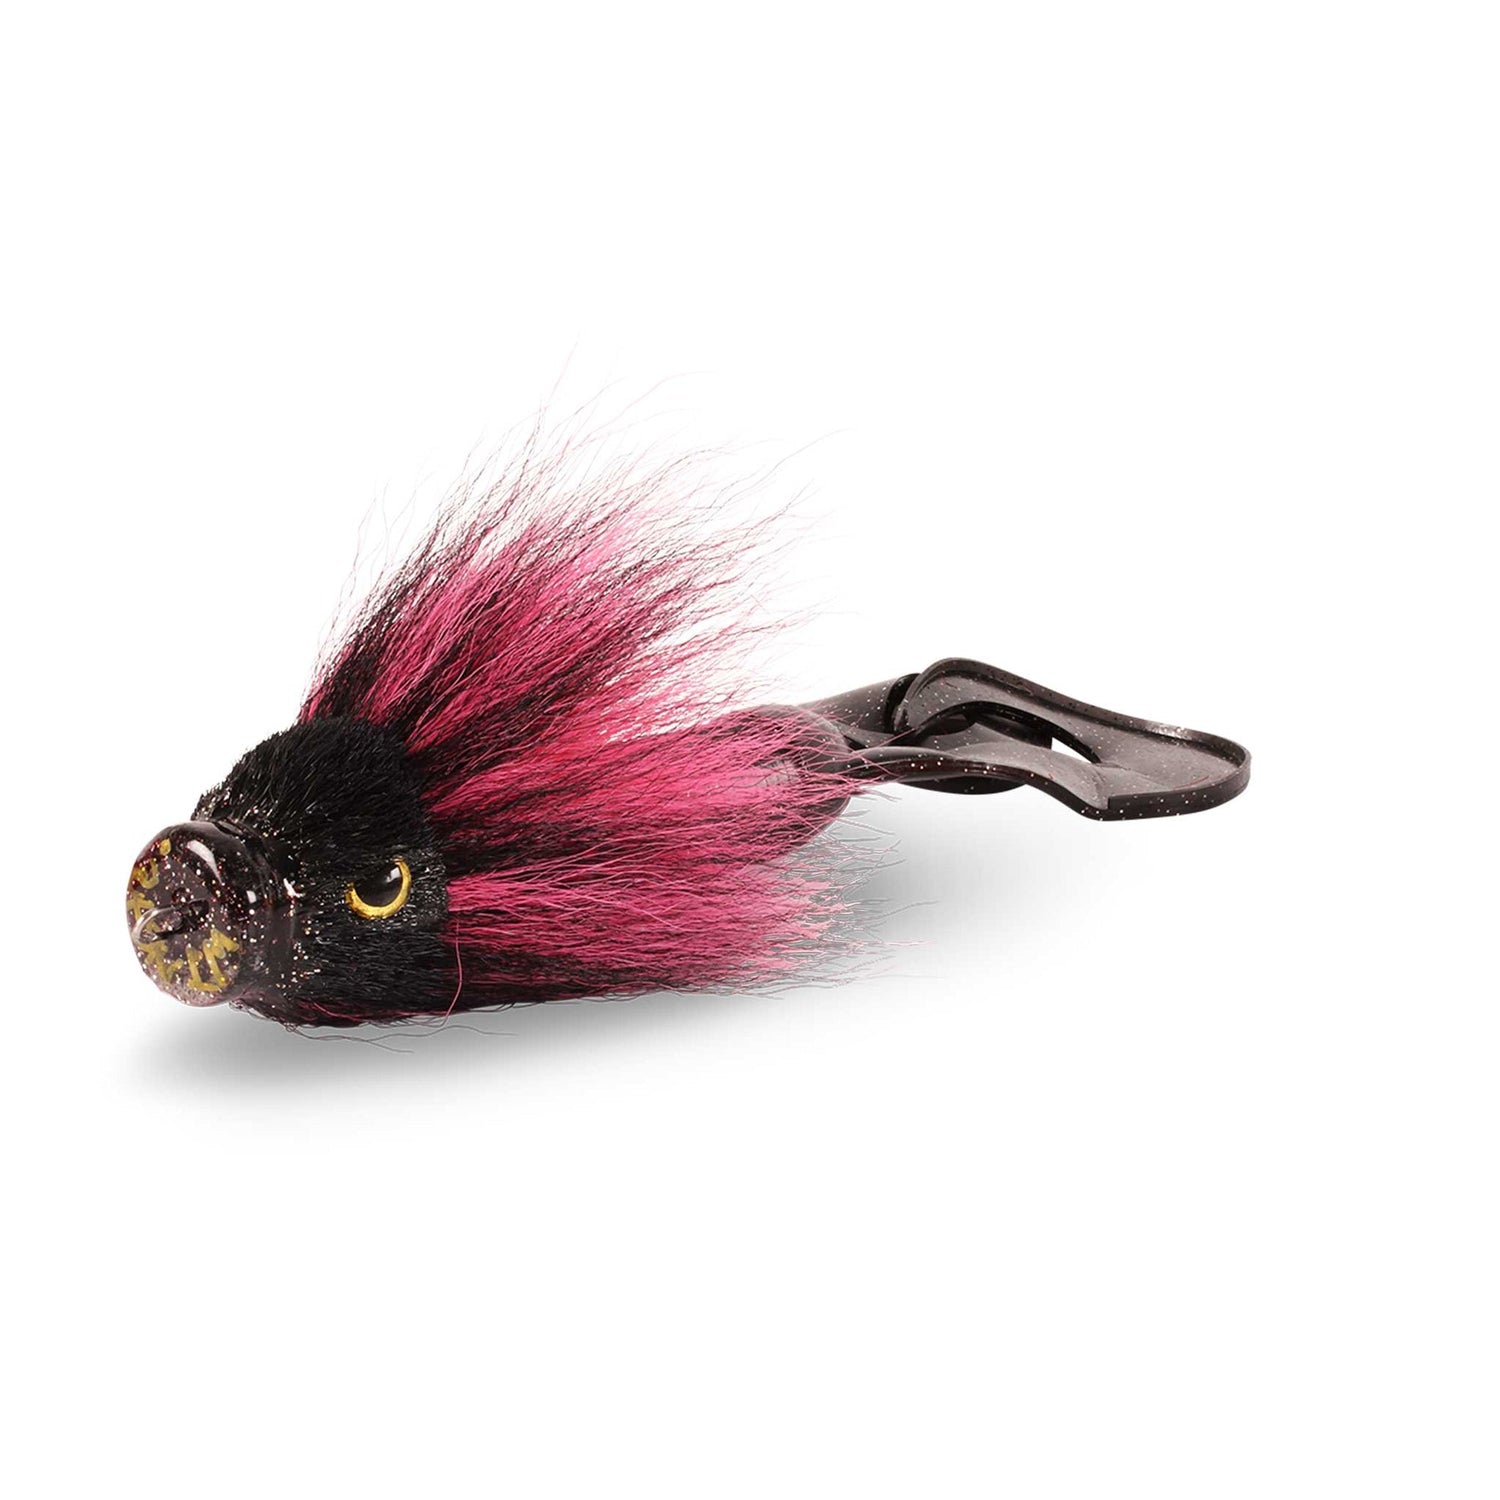 View of Swimbaits Strike Pro Miuras mouse mini Swimbait Pink Panther available at EZOKO Pike and Musky Shop